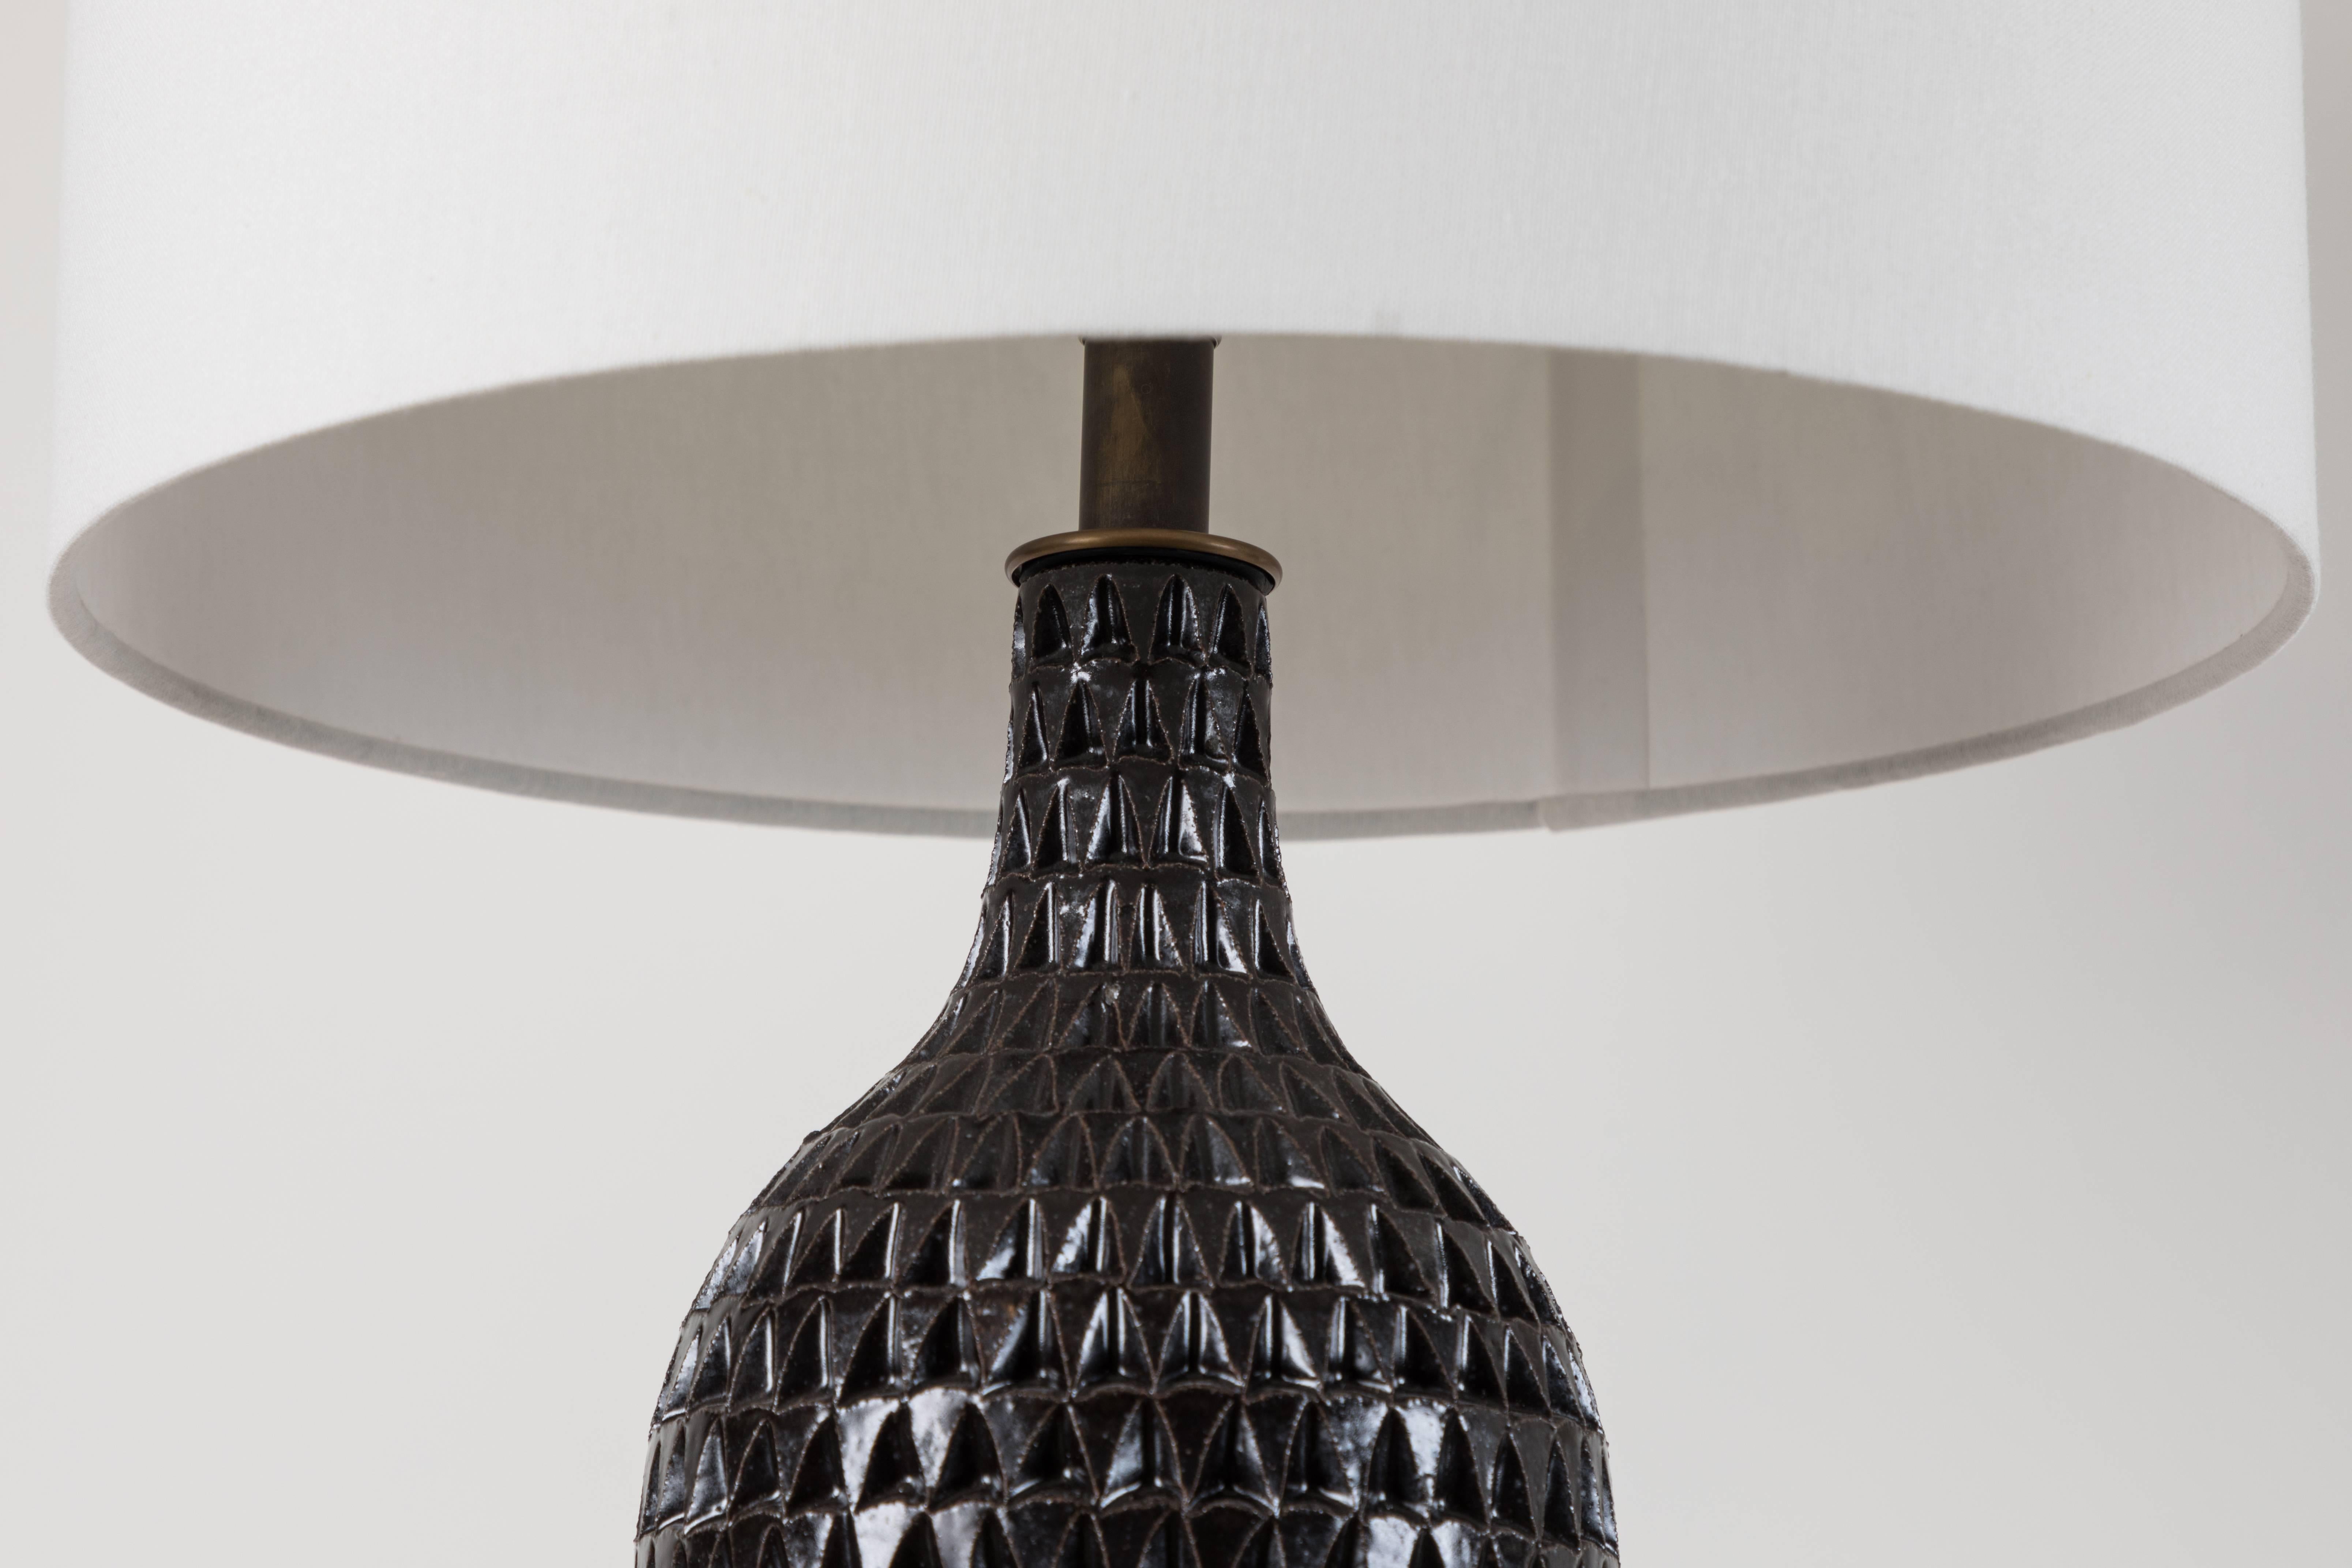 American Pair of XL Black Carved Bottle Lamps by Victoria Morris for Lawson-Fenning